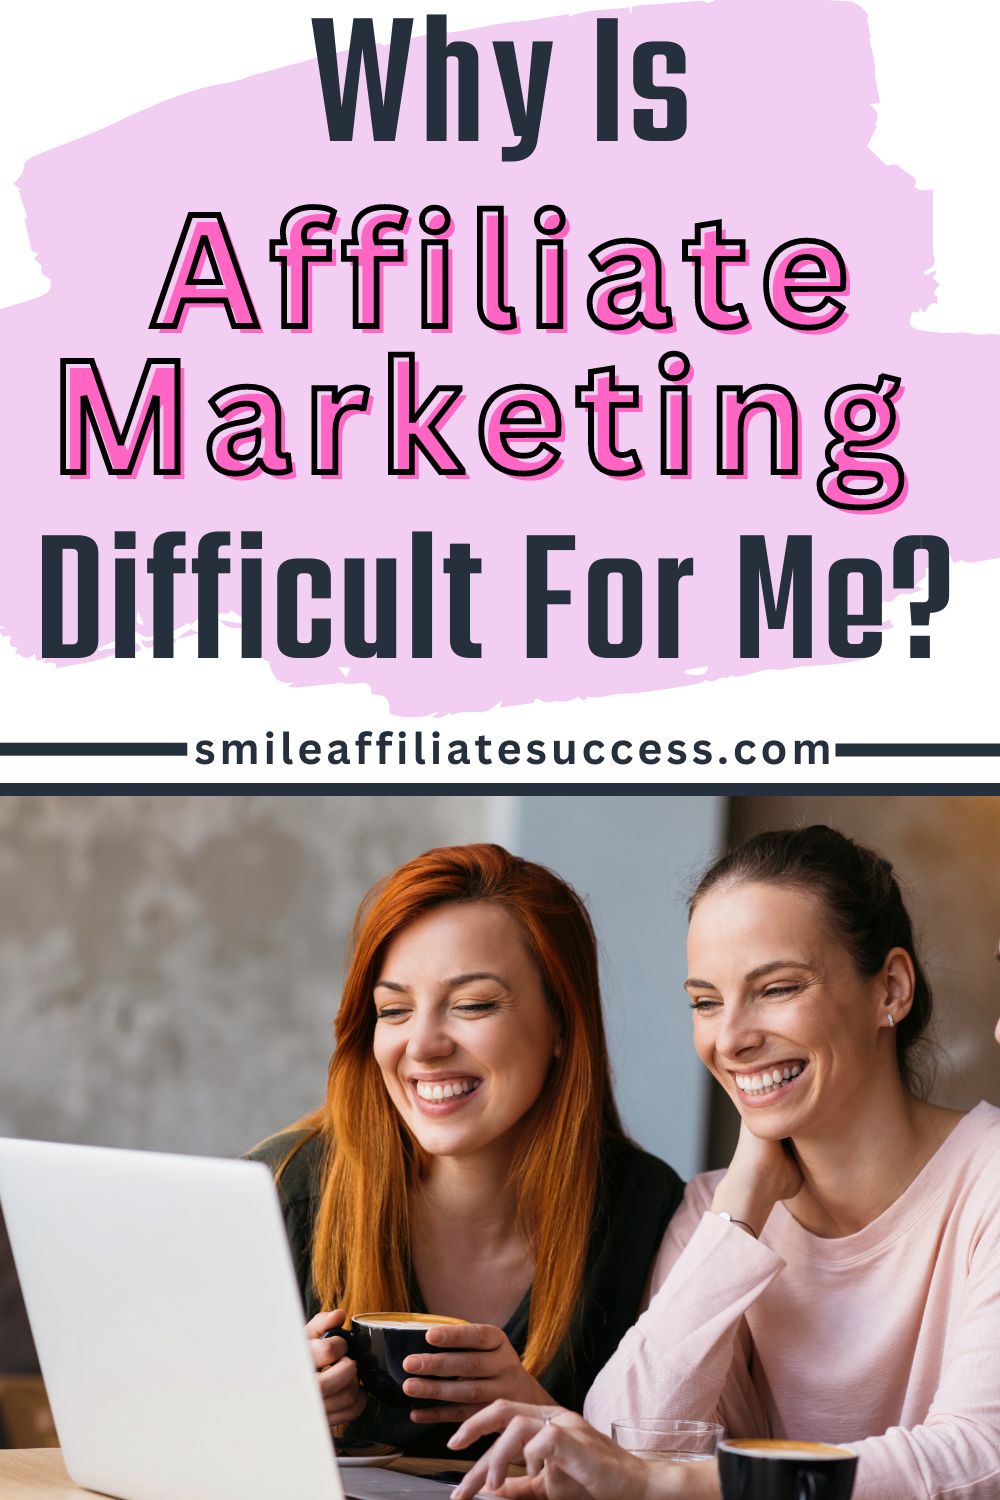 Why Is Affiliate Marketing Difficult For Me But It Seems Easy For Other People?